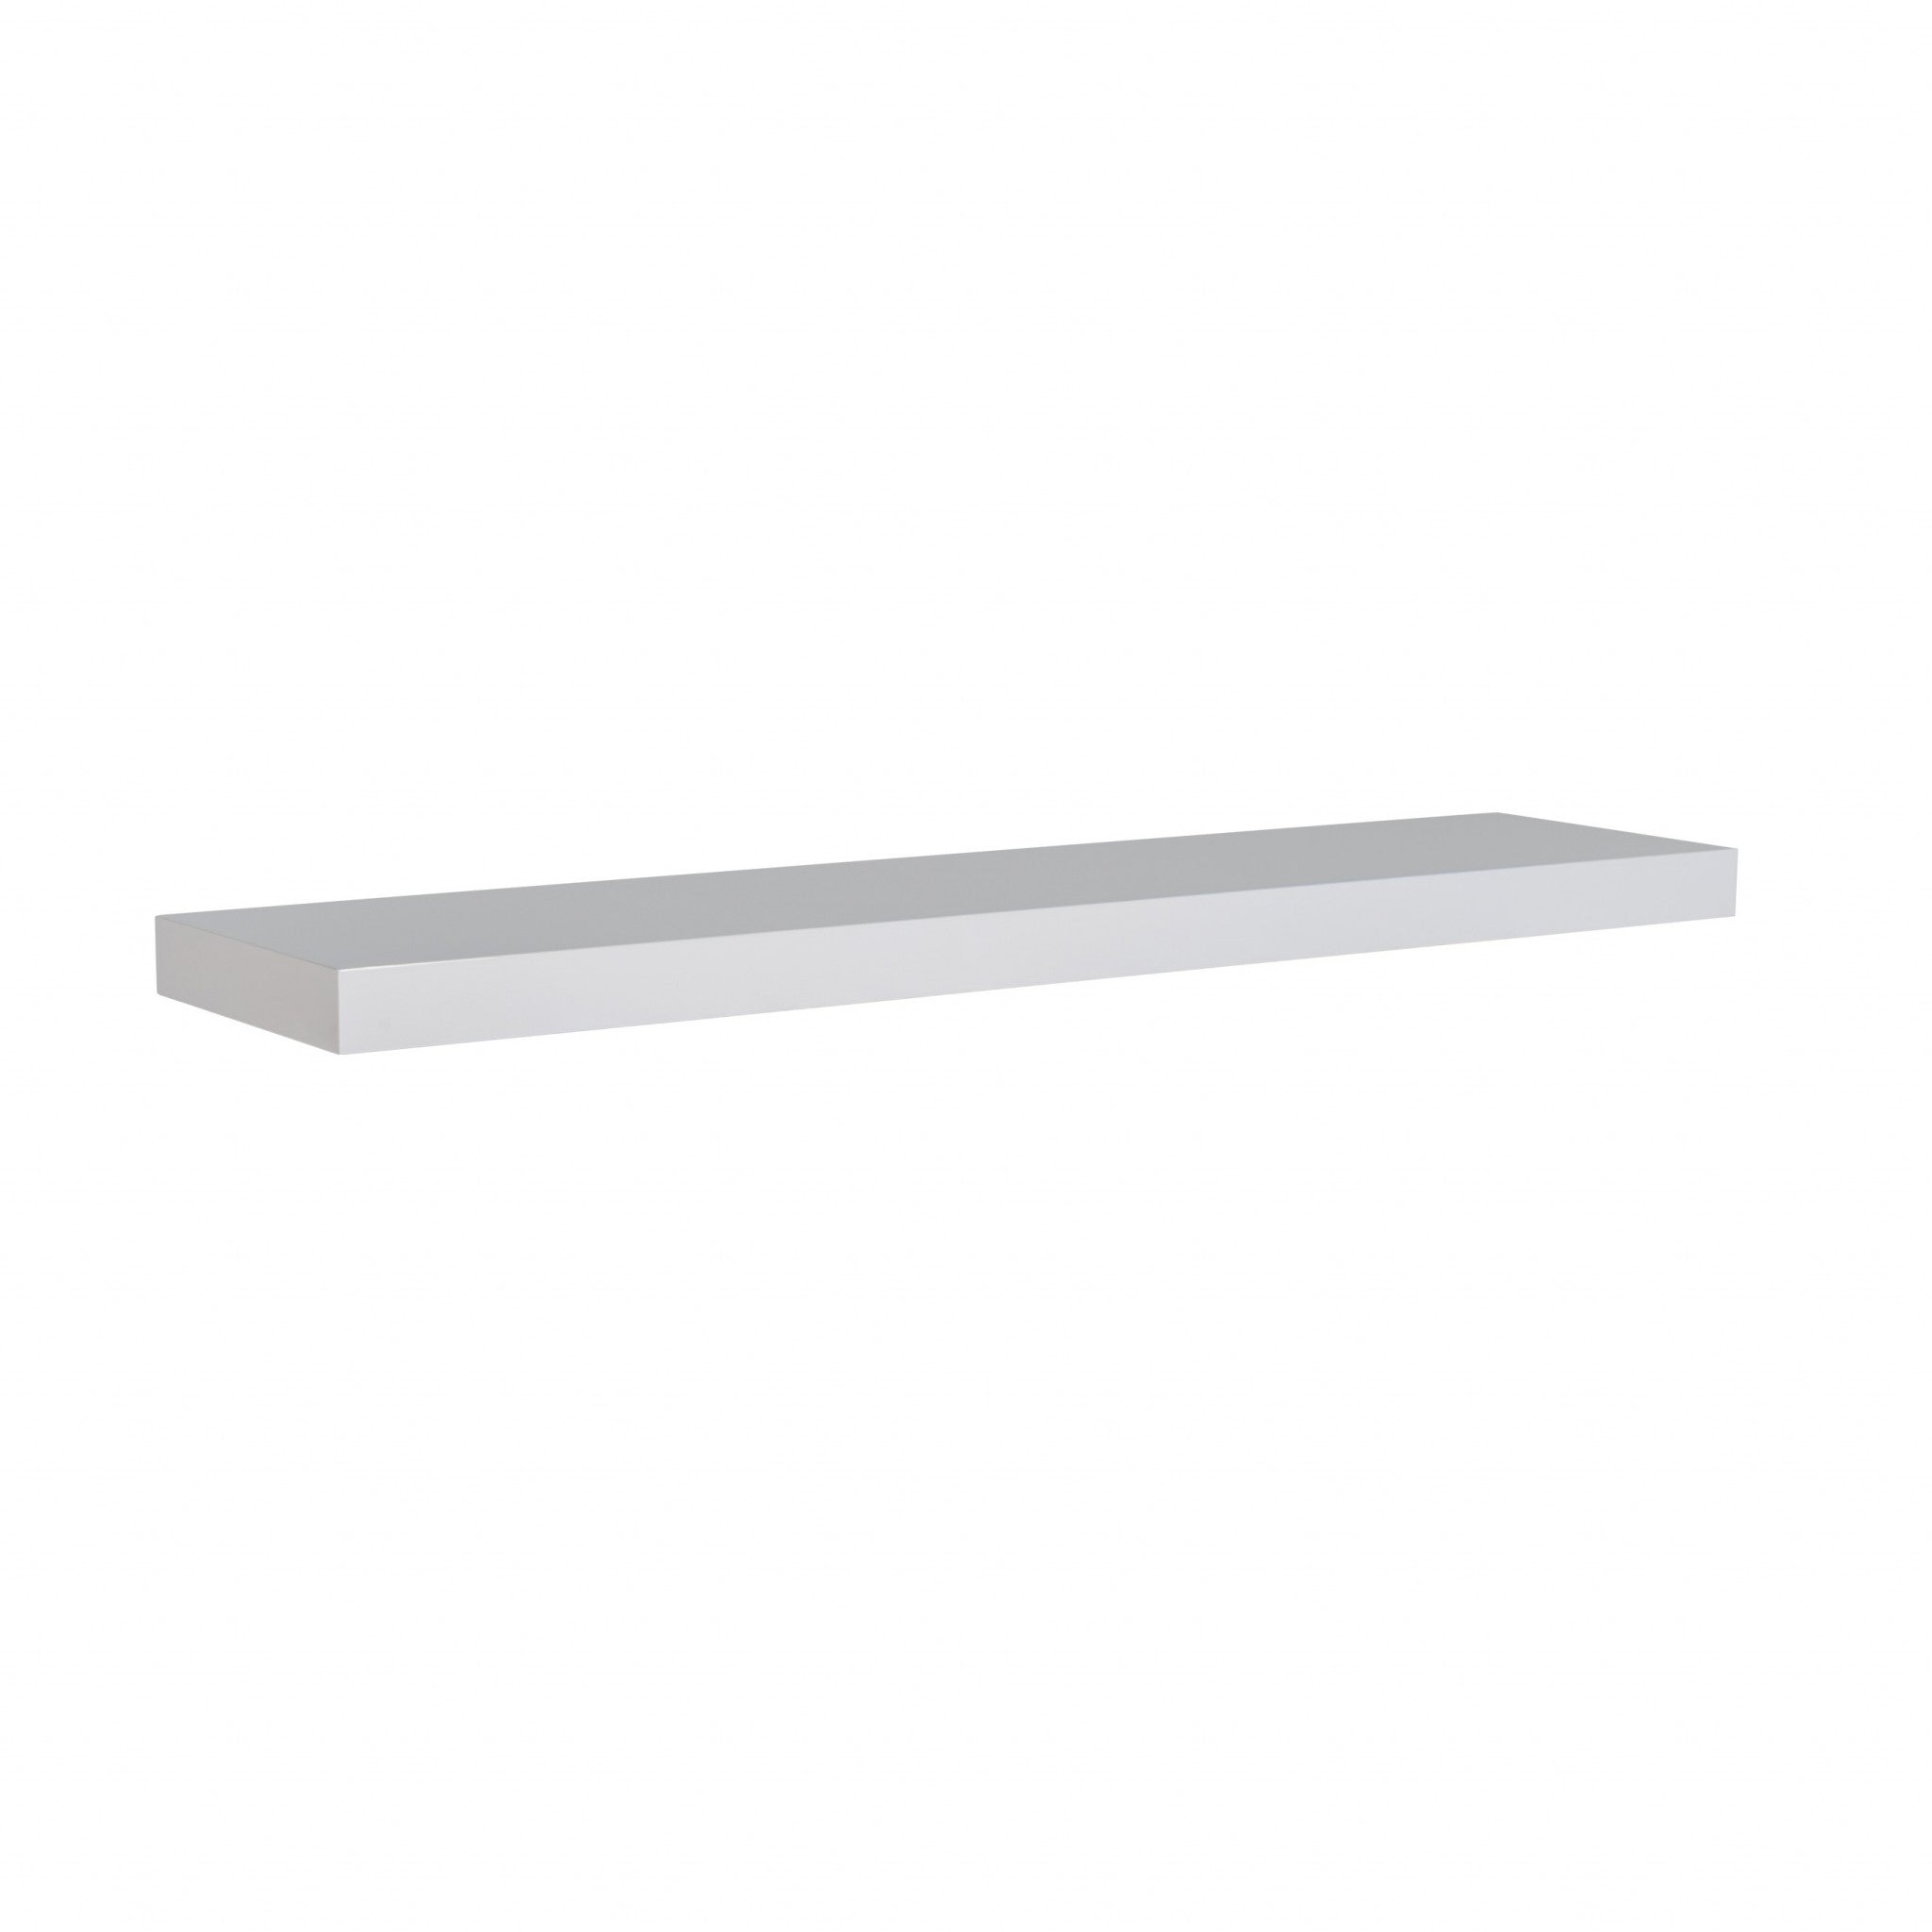 43" White Wooden Wall Mounted Floating Shelf